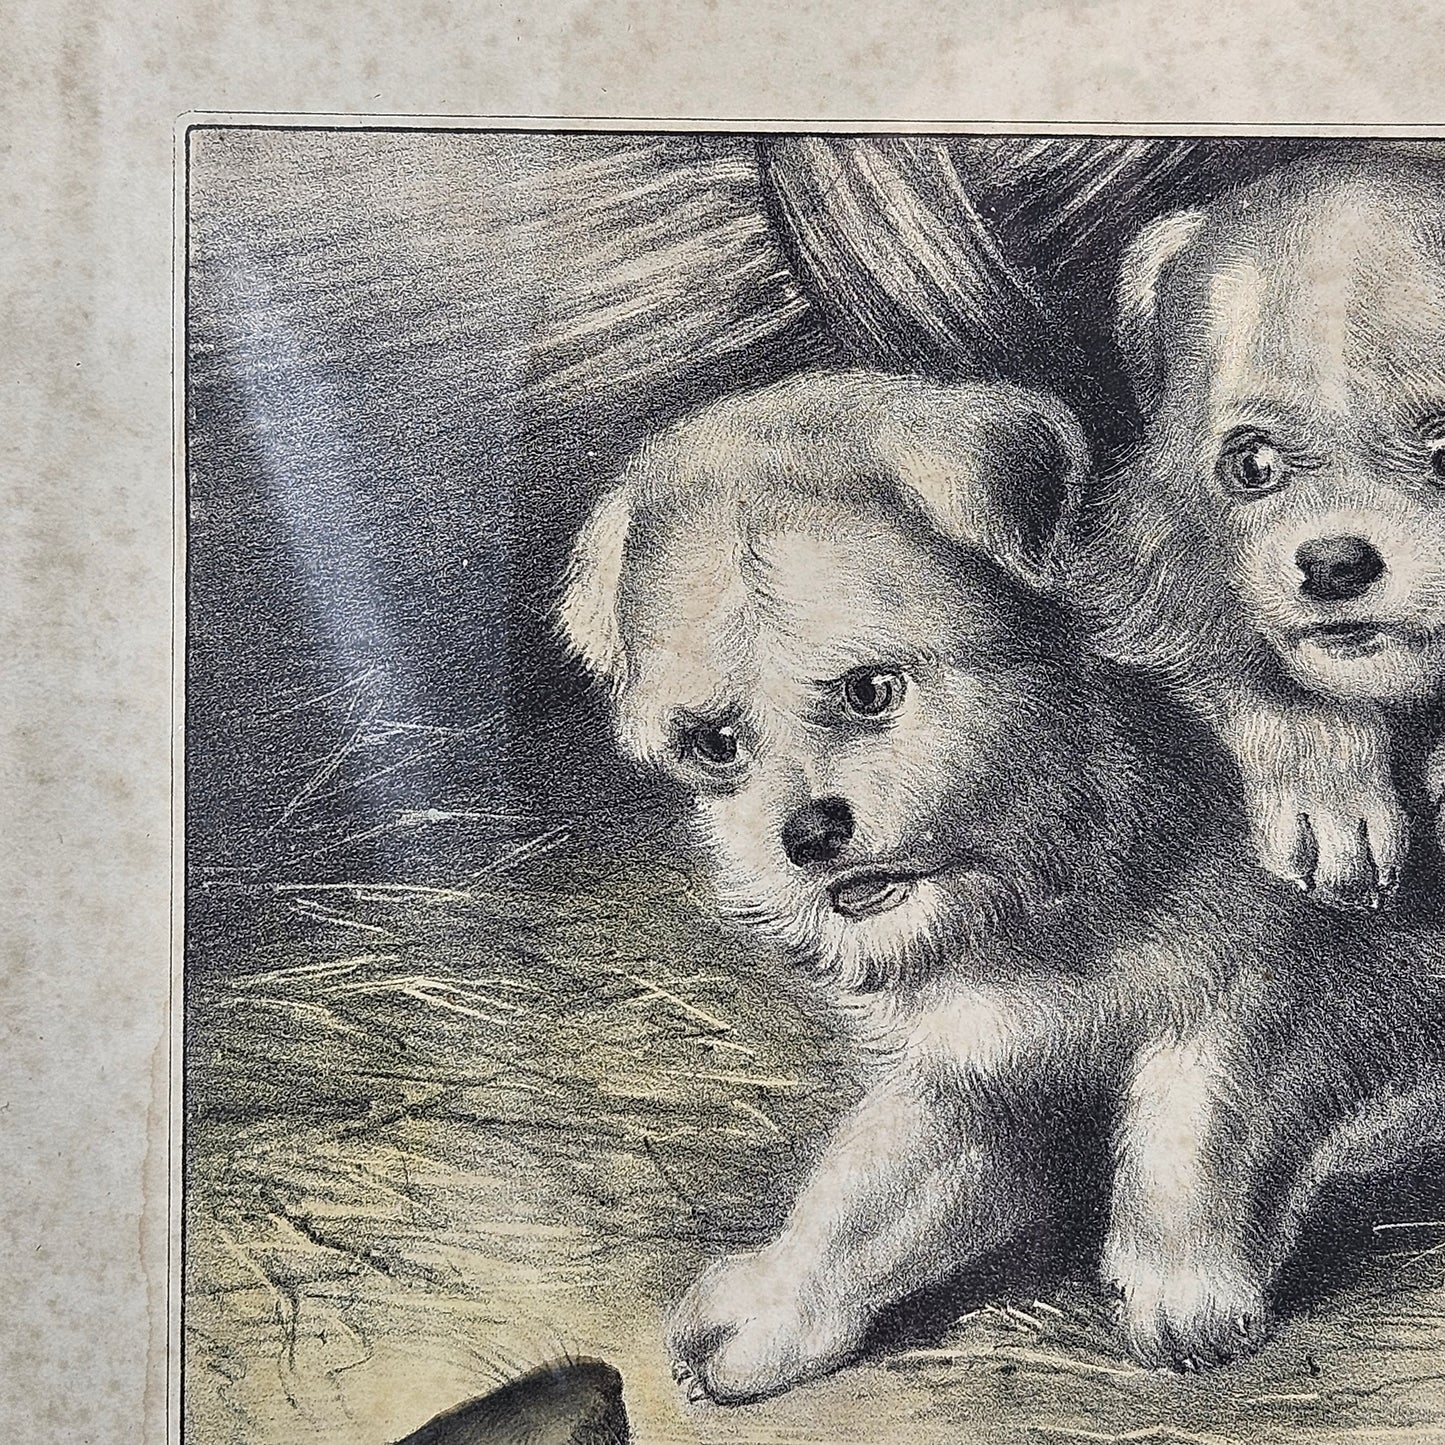 Currier & Ives, Dogs and Mouse, Who’s Afraid of You, Antique Etching